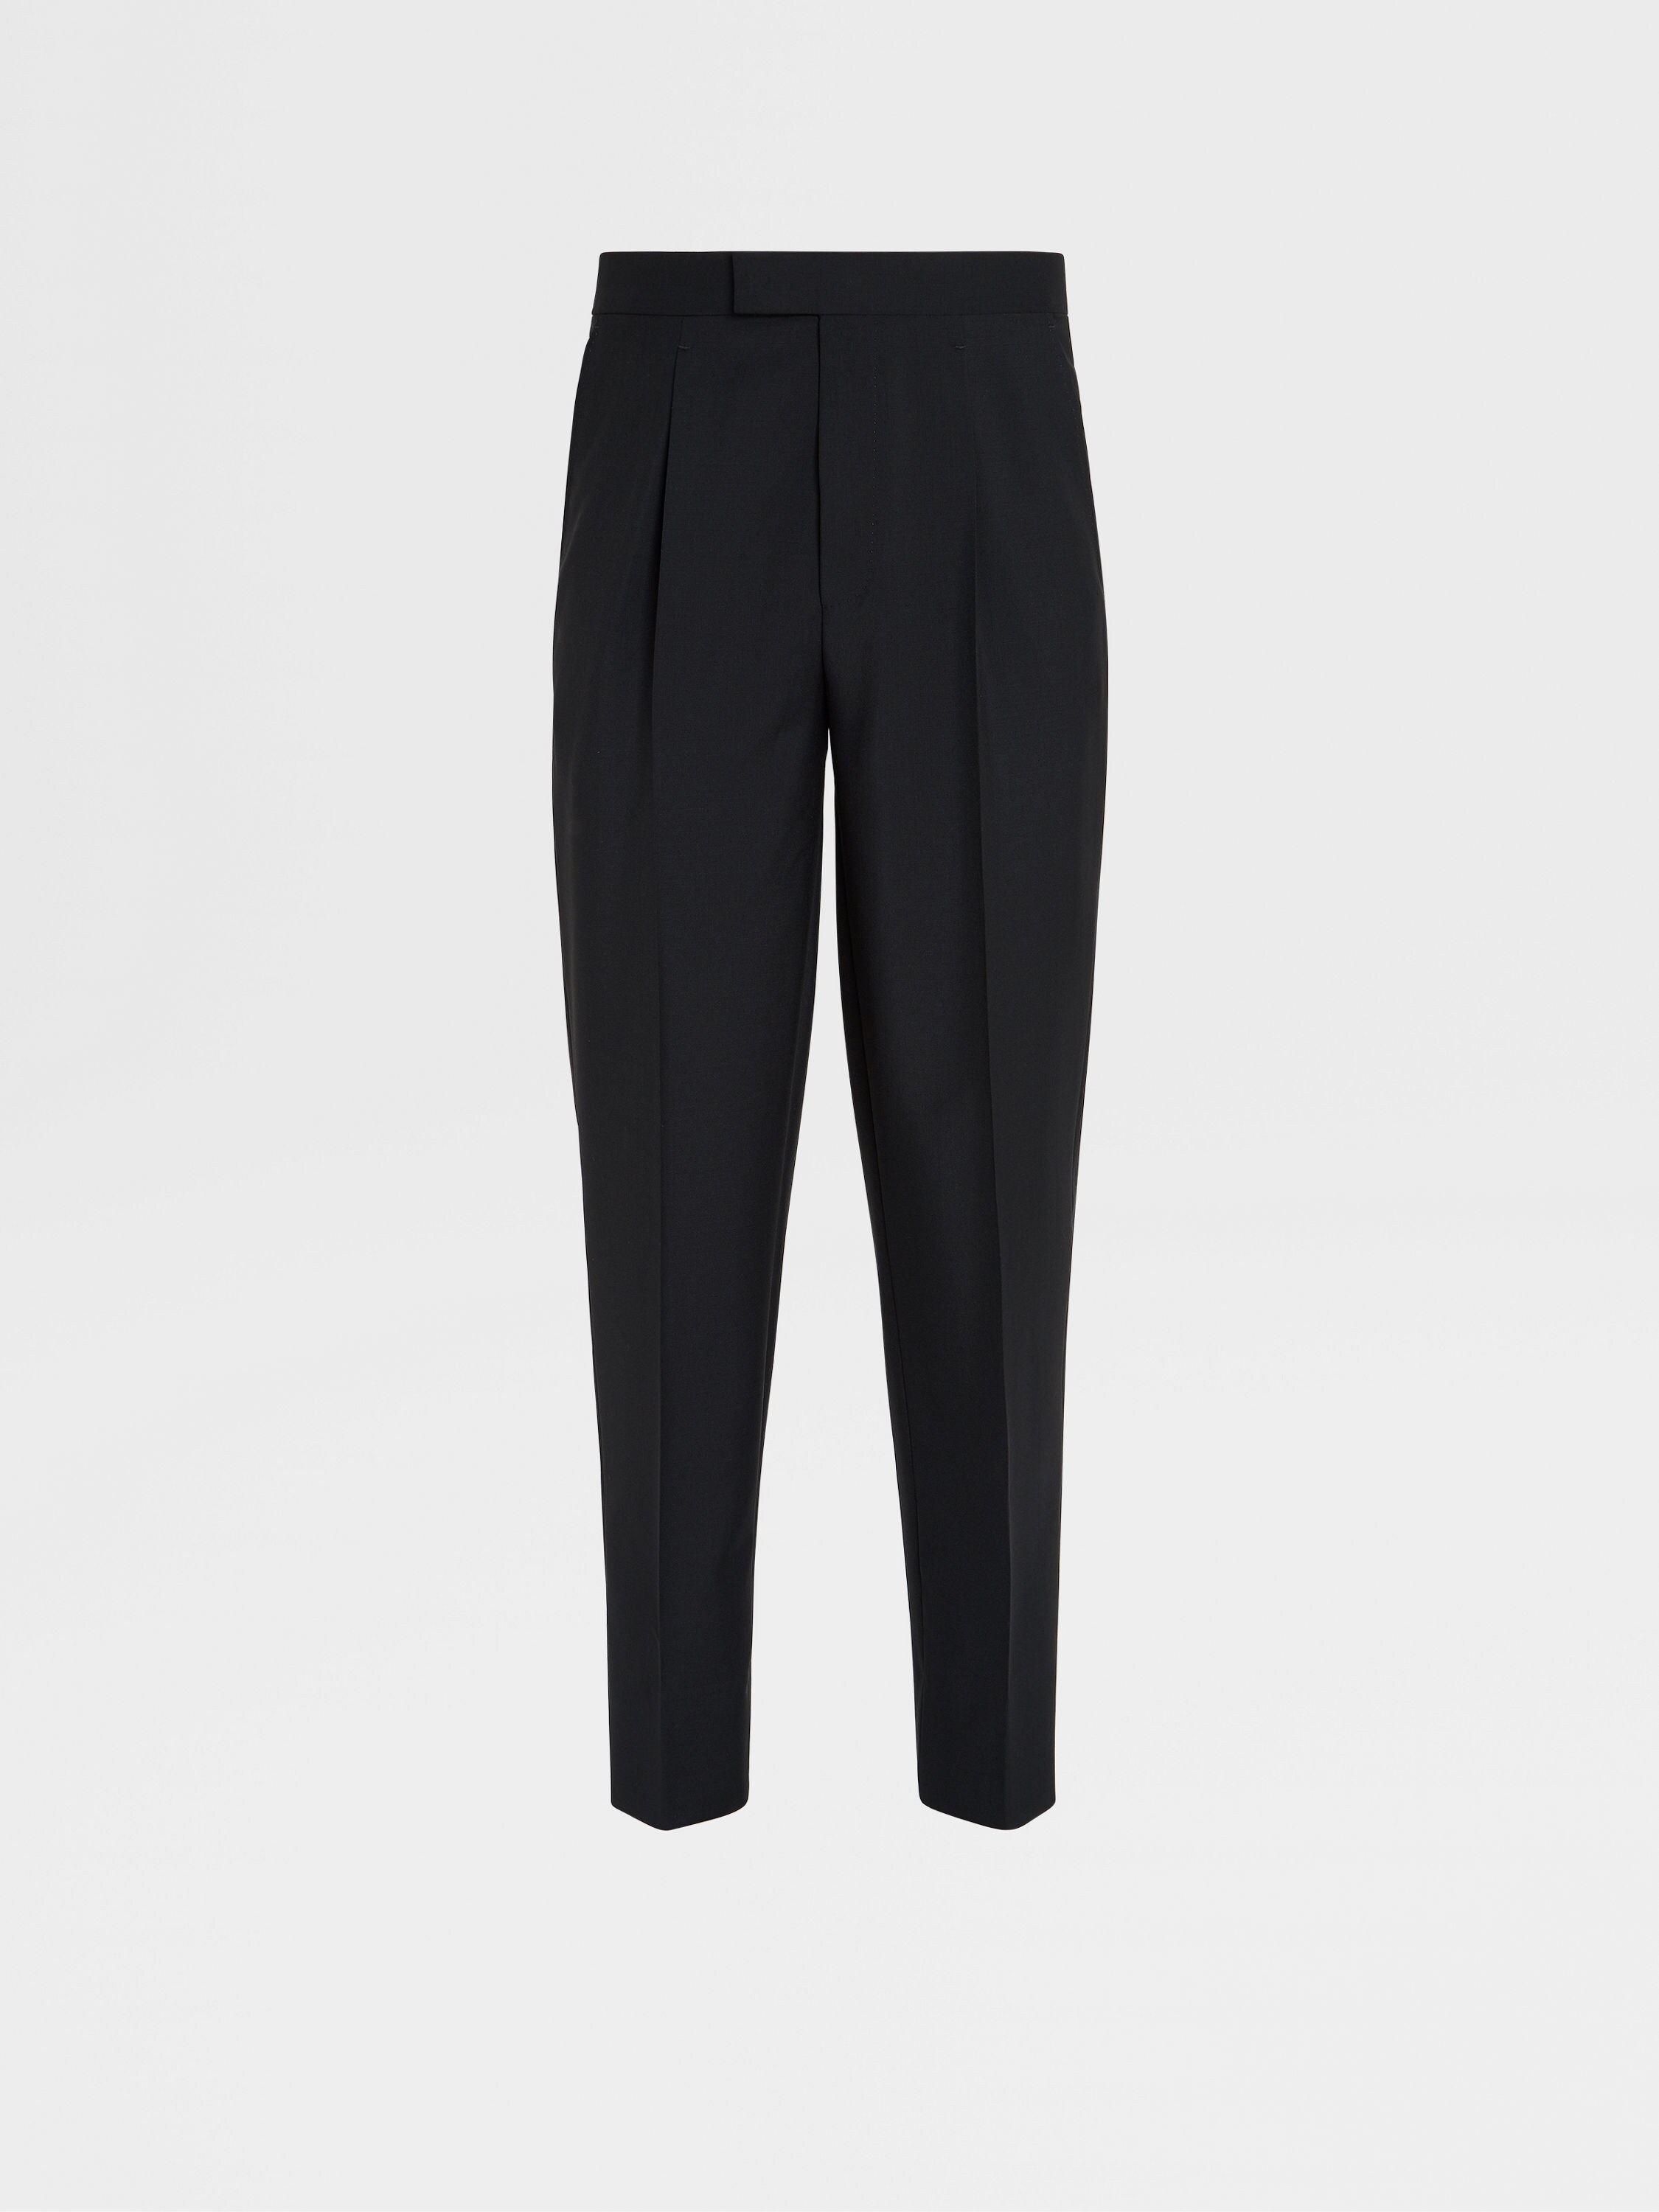 Black Wool and Mohair Pleated Evening Pants